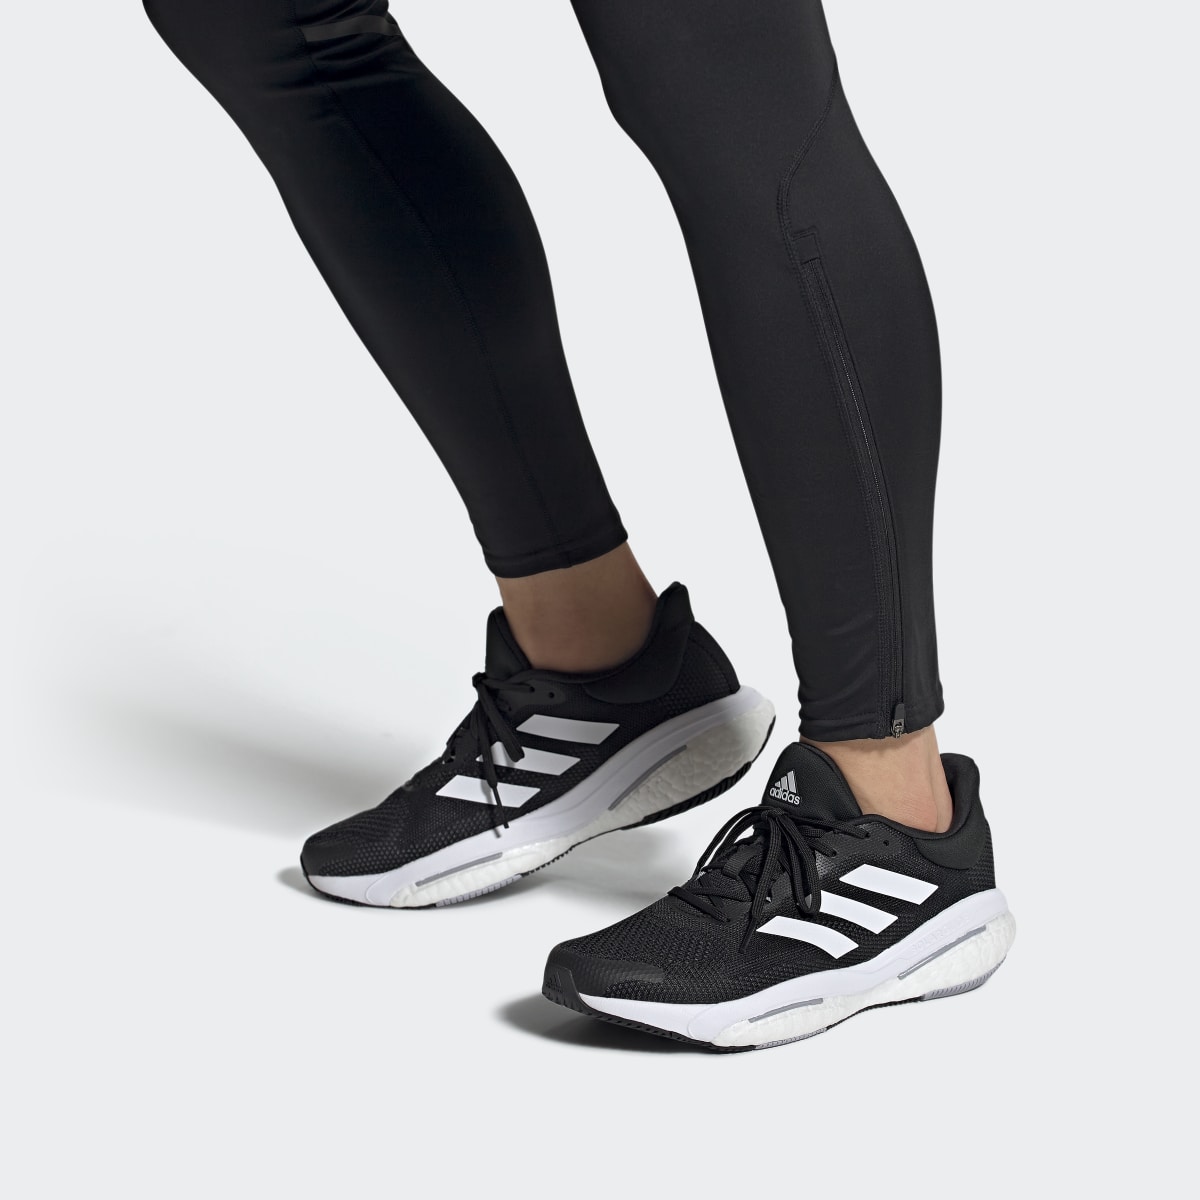 Adidas Solar Glide 5 Shoes Wide. 5